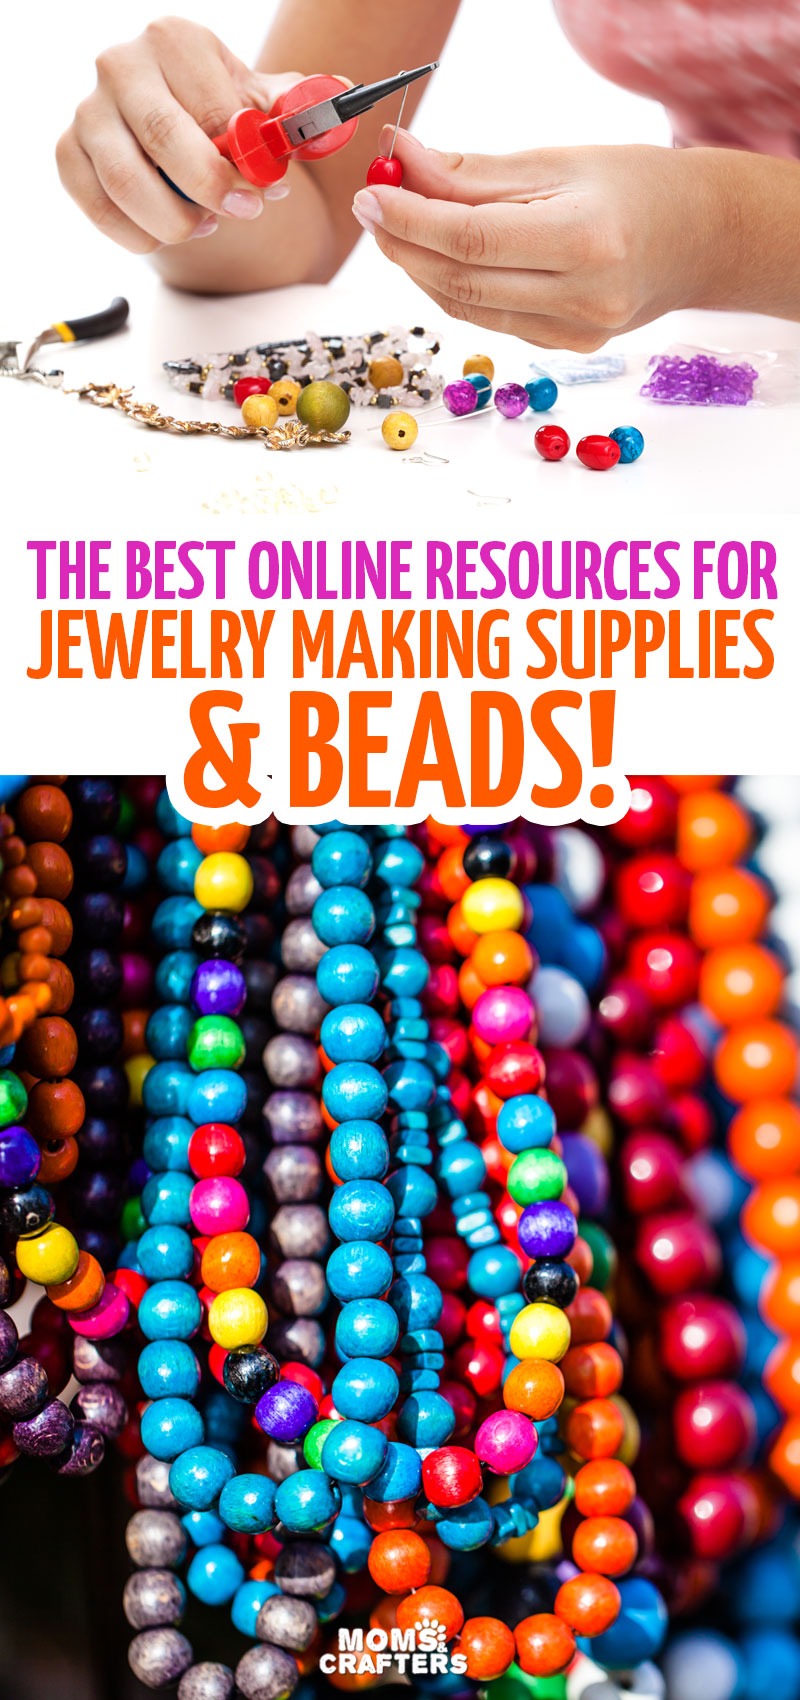 Places to buy beads online * Moms and Crafters